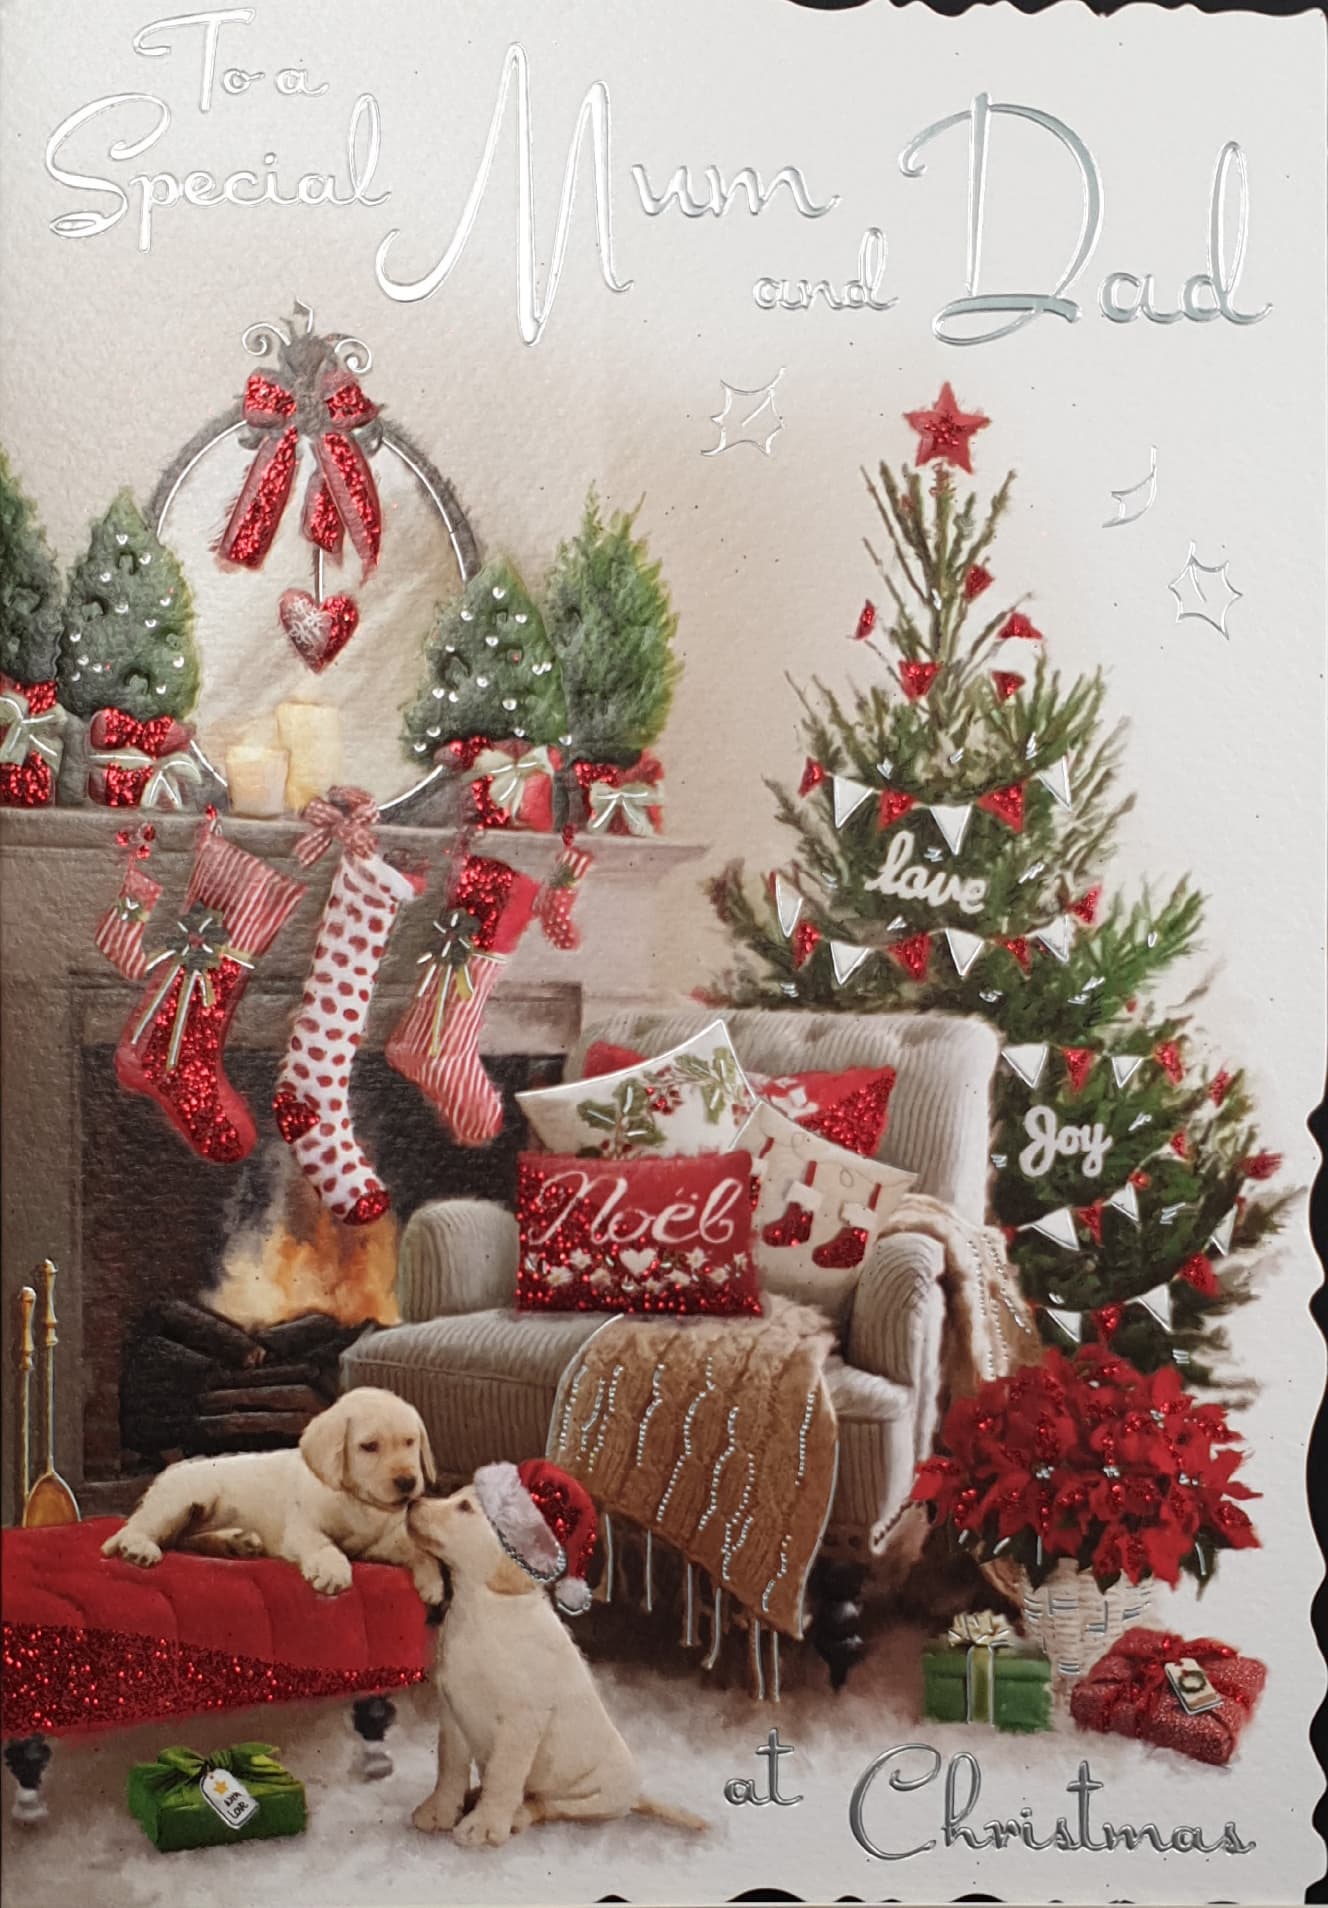 Mum and Dad Christmas Card - Puppies & Stockings by Fireplace